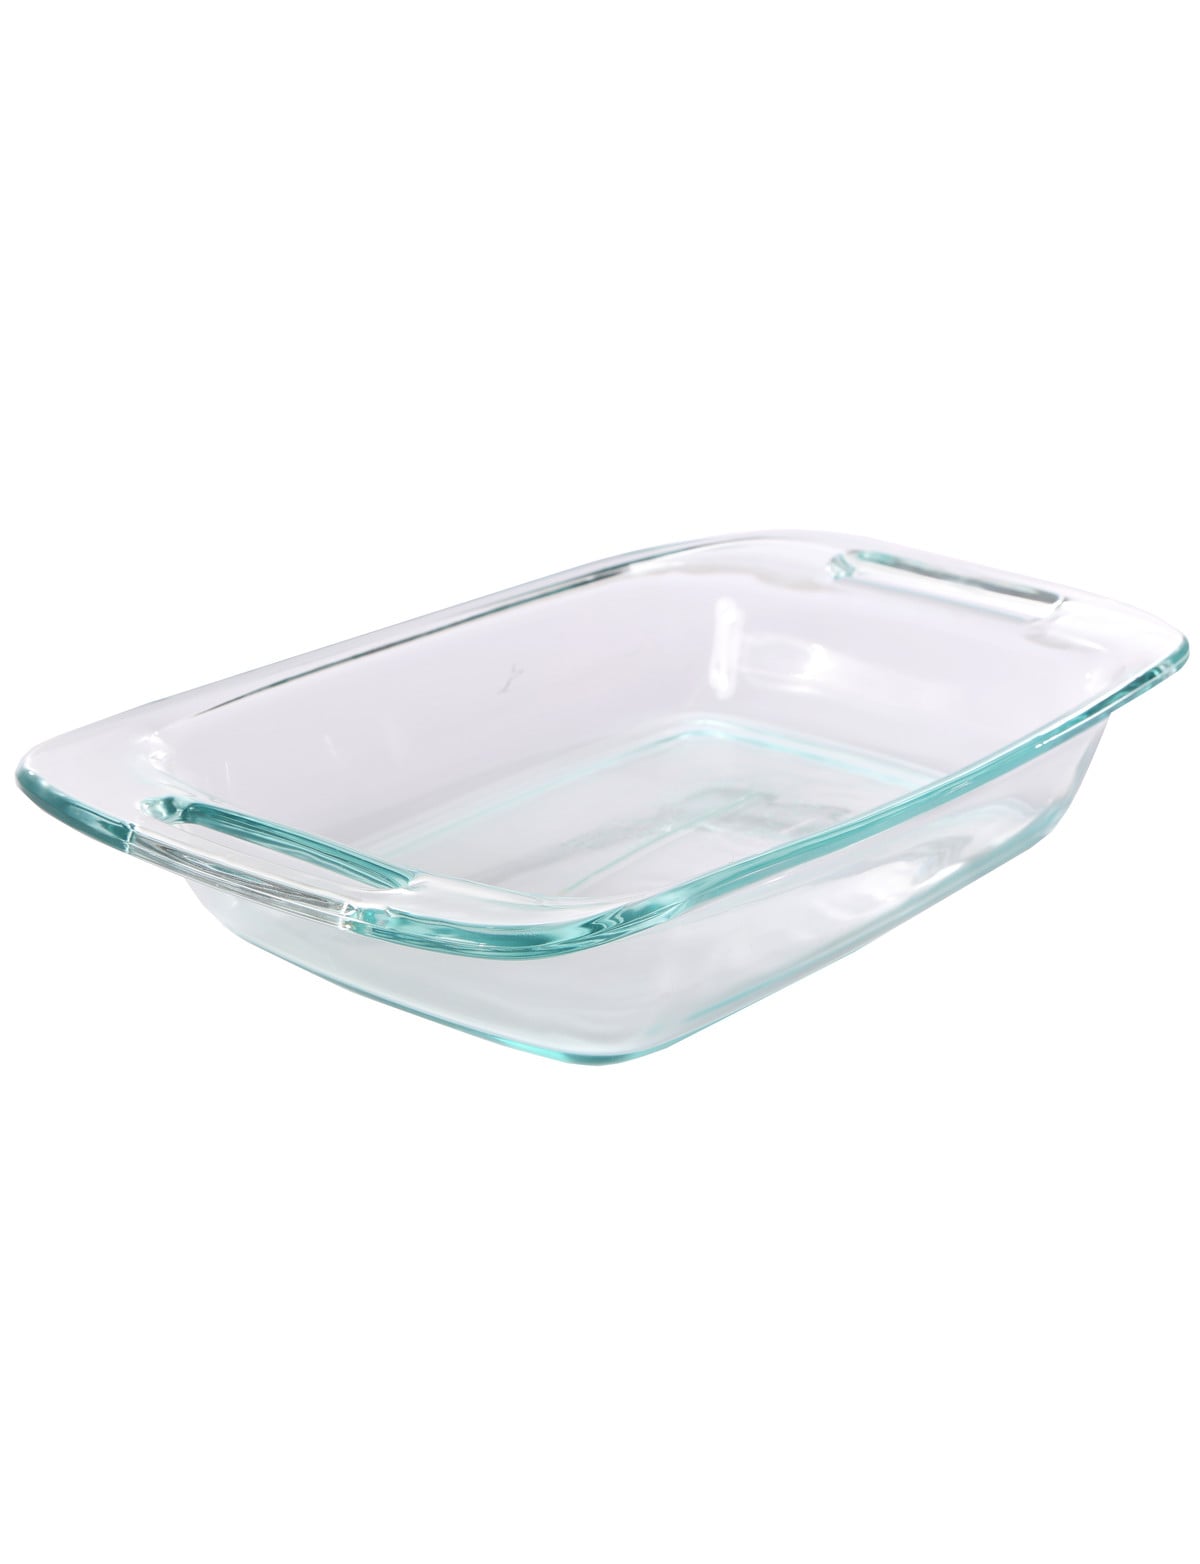 Pyrex Easy Grab Glass Square Baking Dish with Lid